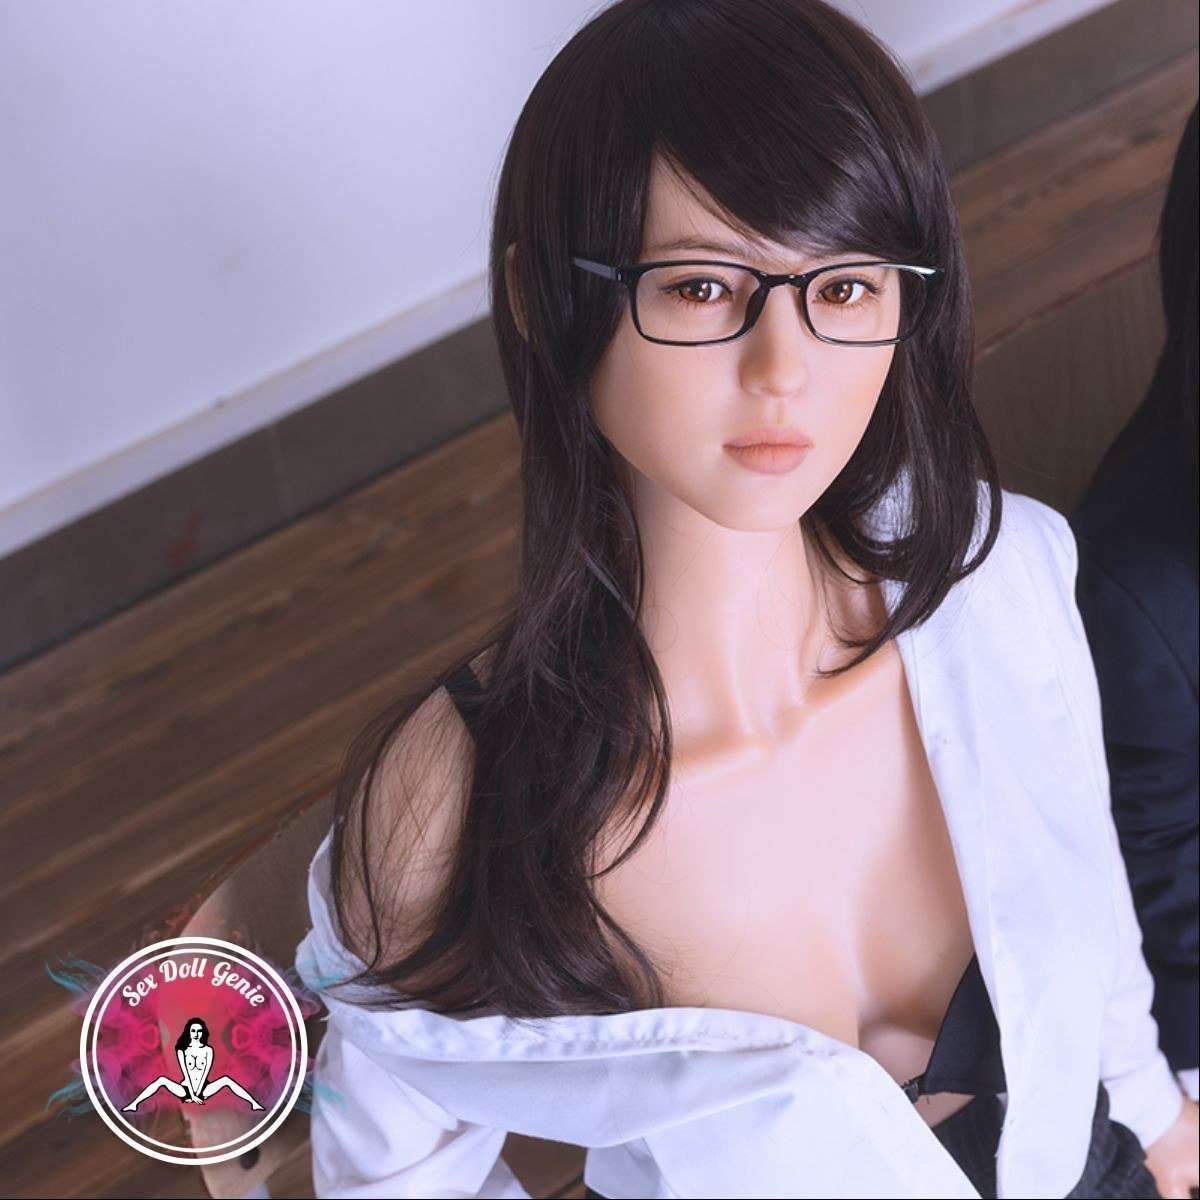 DS Doll - 167evo - Sharon Head - Type 2 D Cup Silicone Doll-9